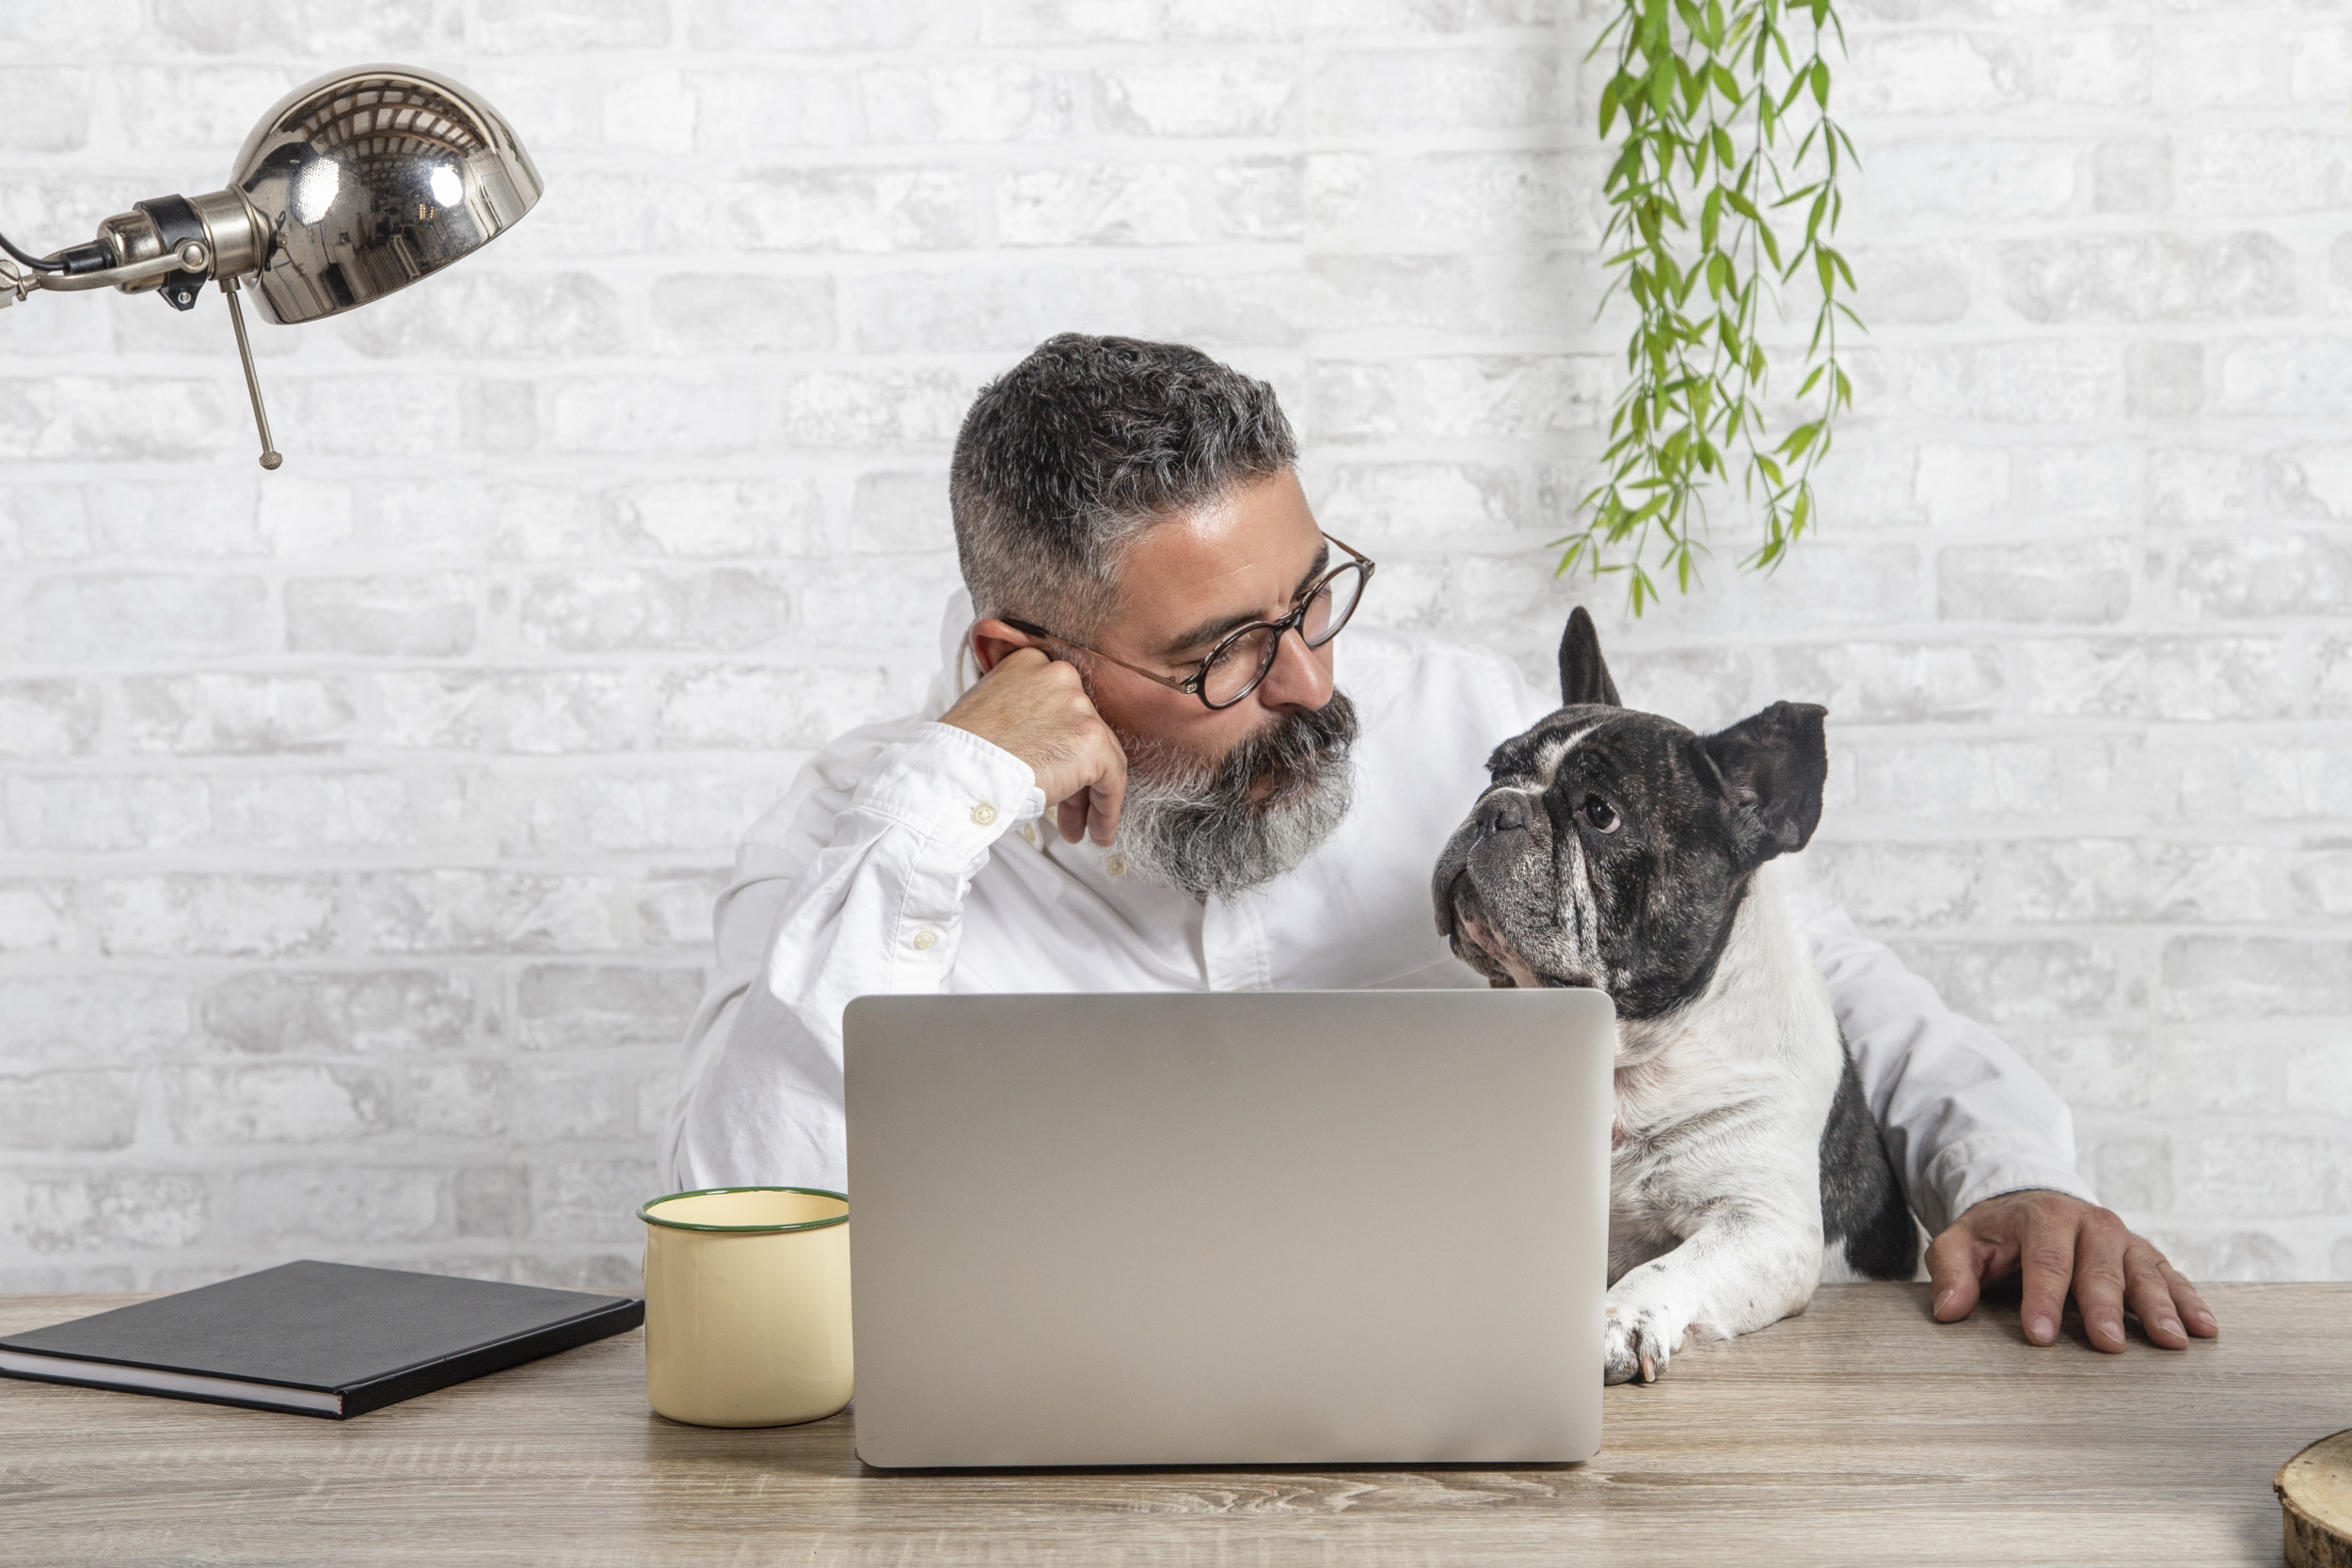 Keeping your dog entertained while working from home